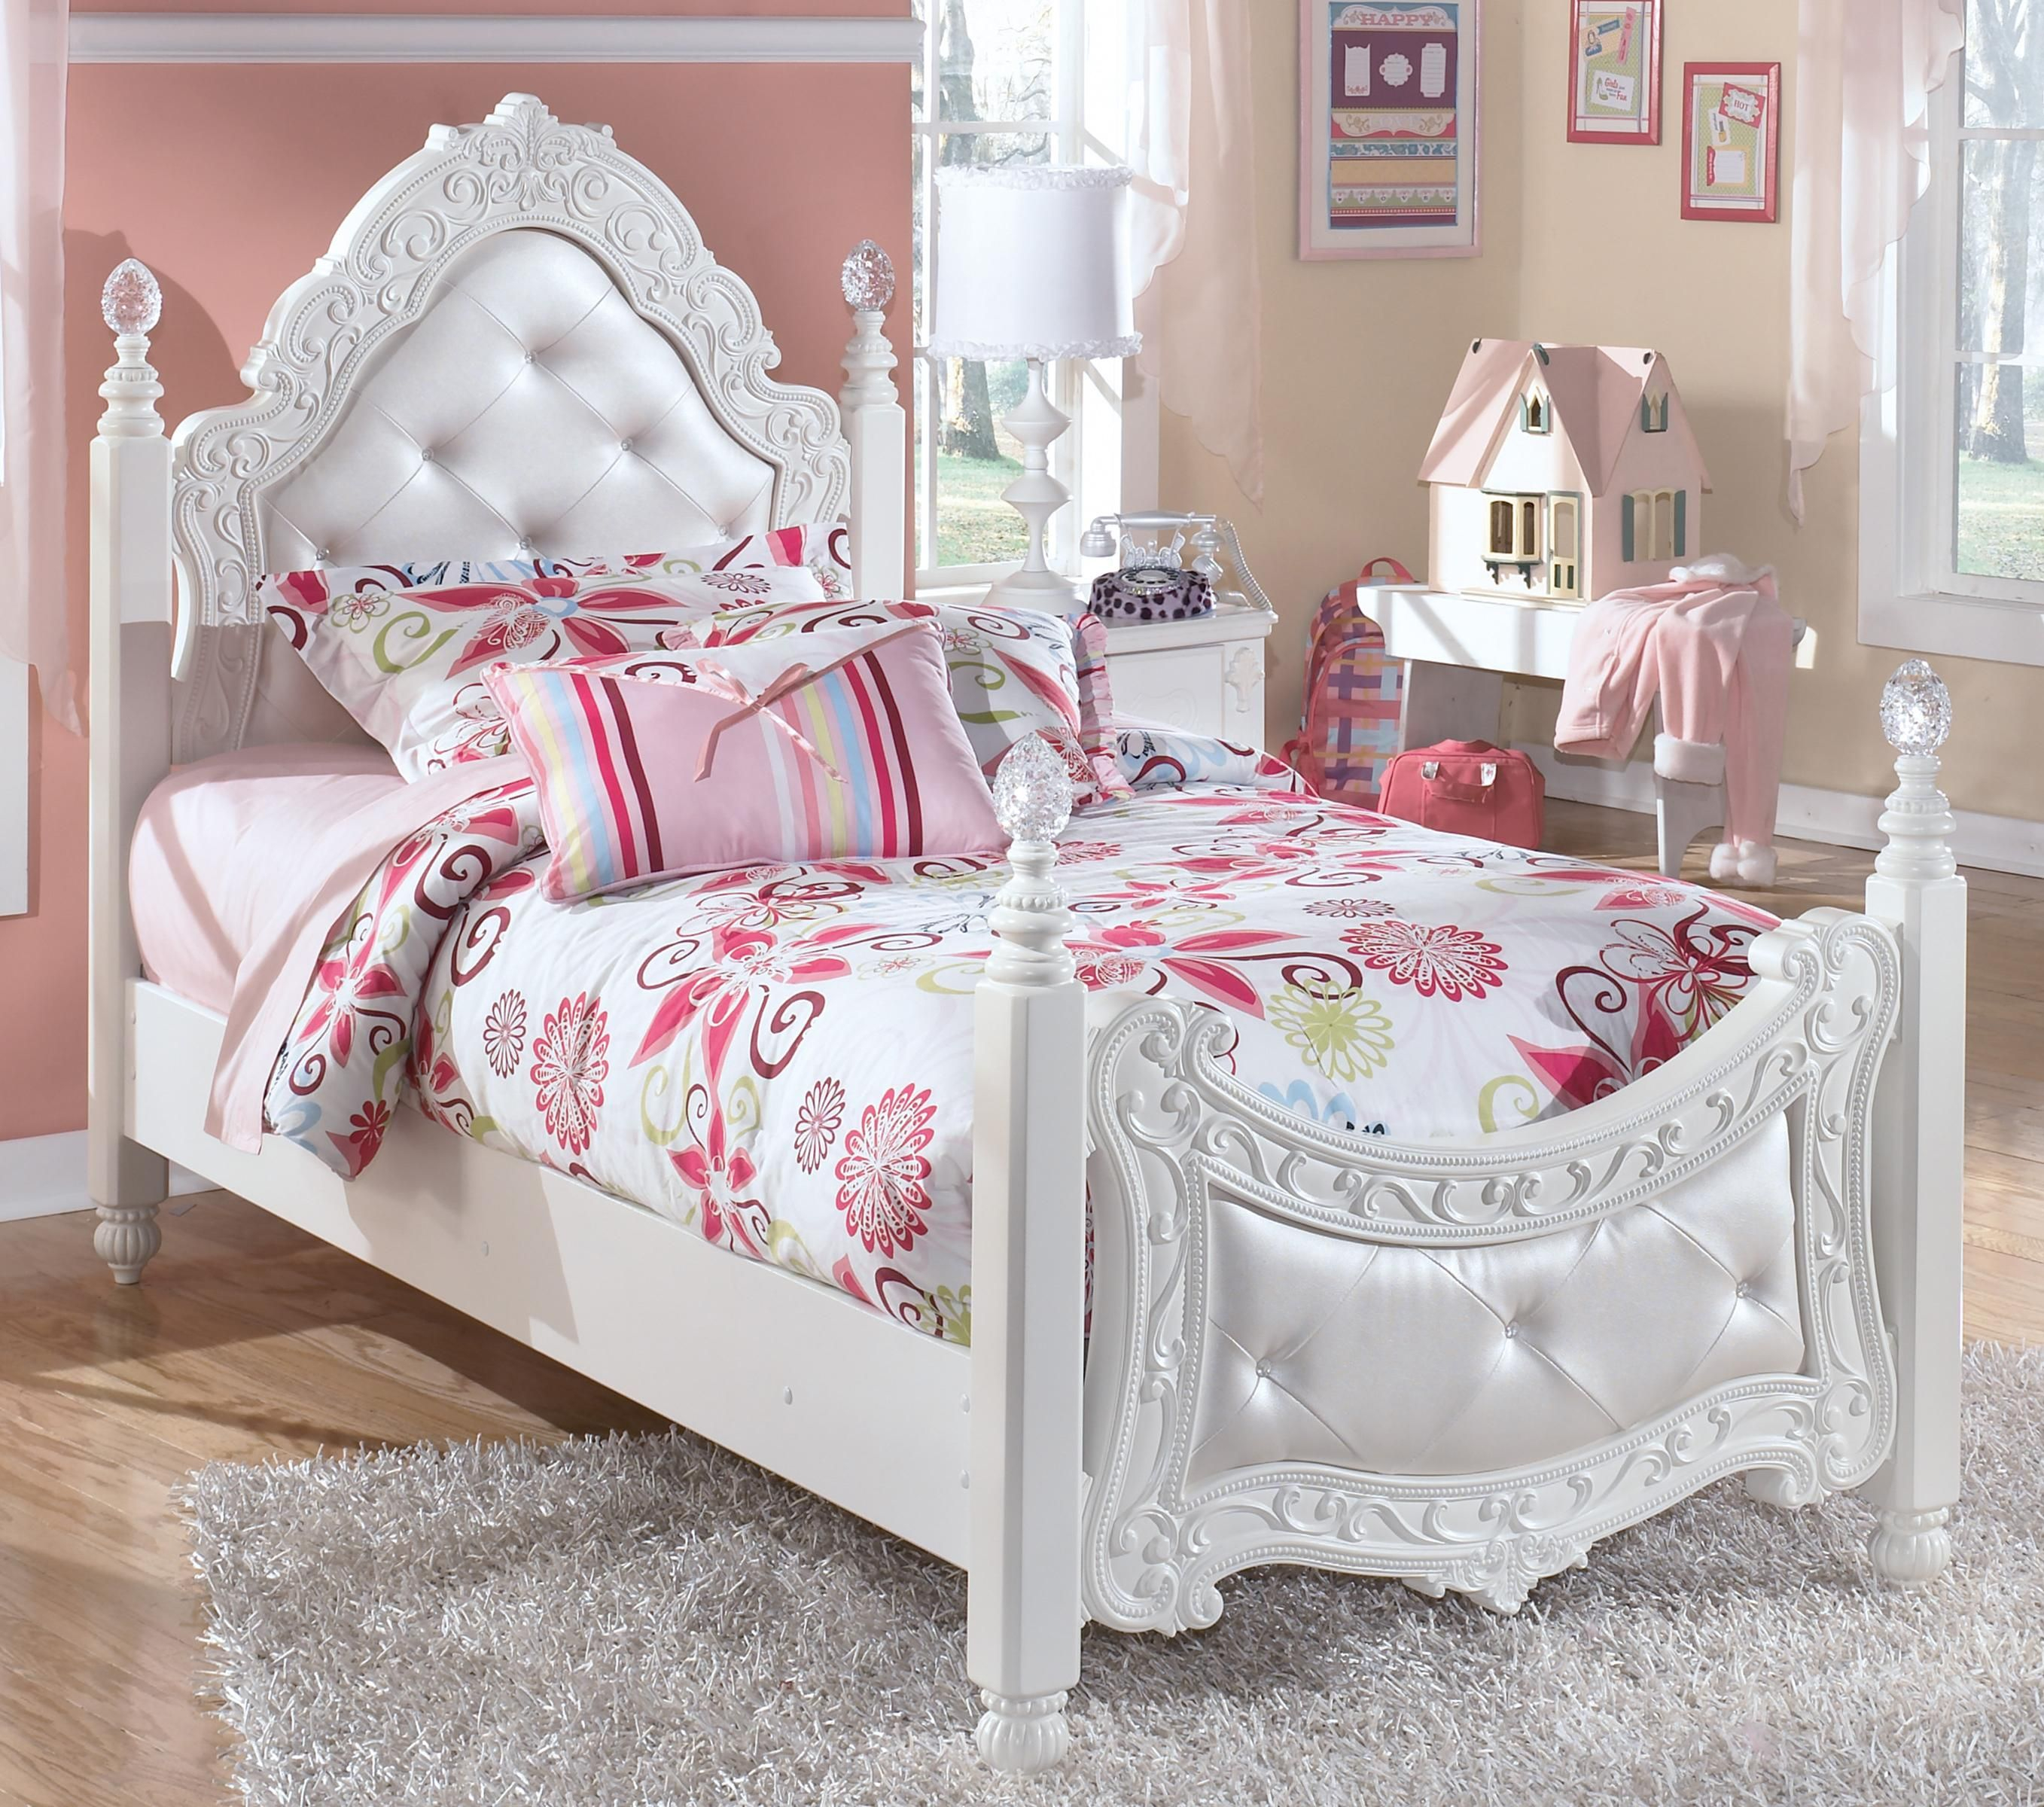 Exquisite Twin Ornate Poster Bed With Tufted Headboard Footboard intended for proportions 2715 X 2400